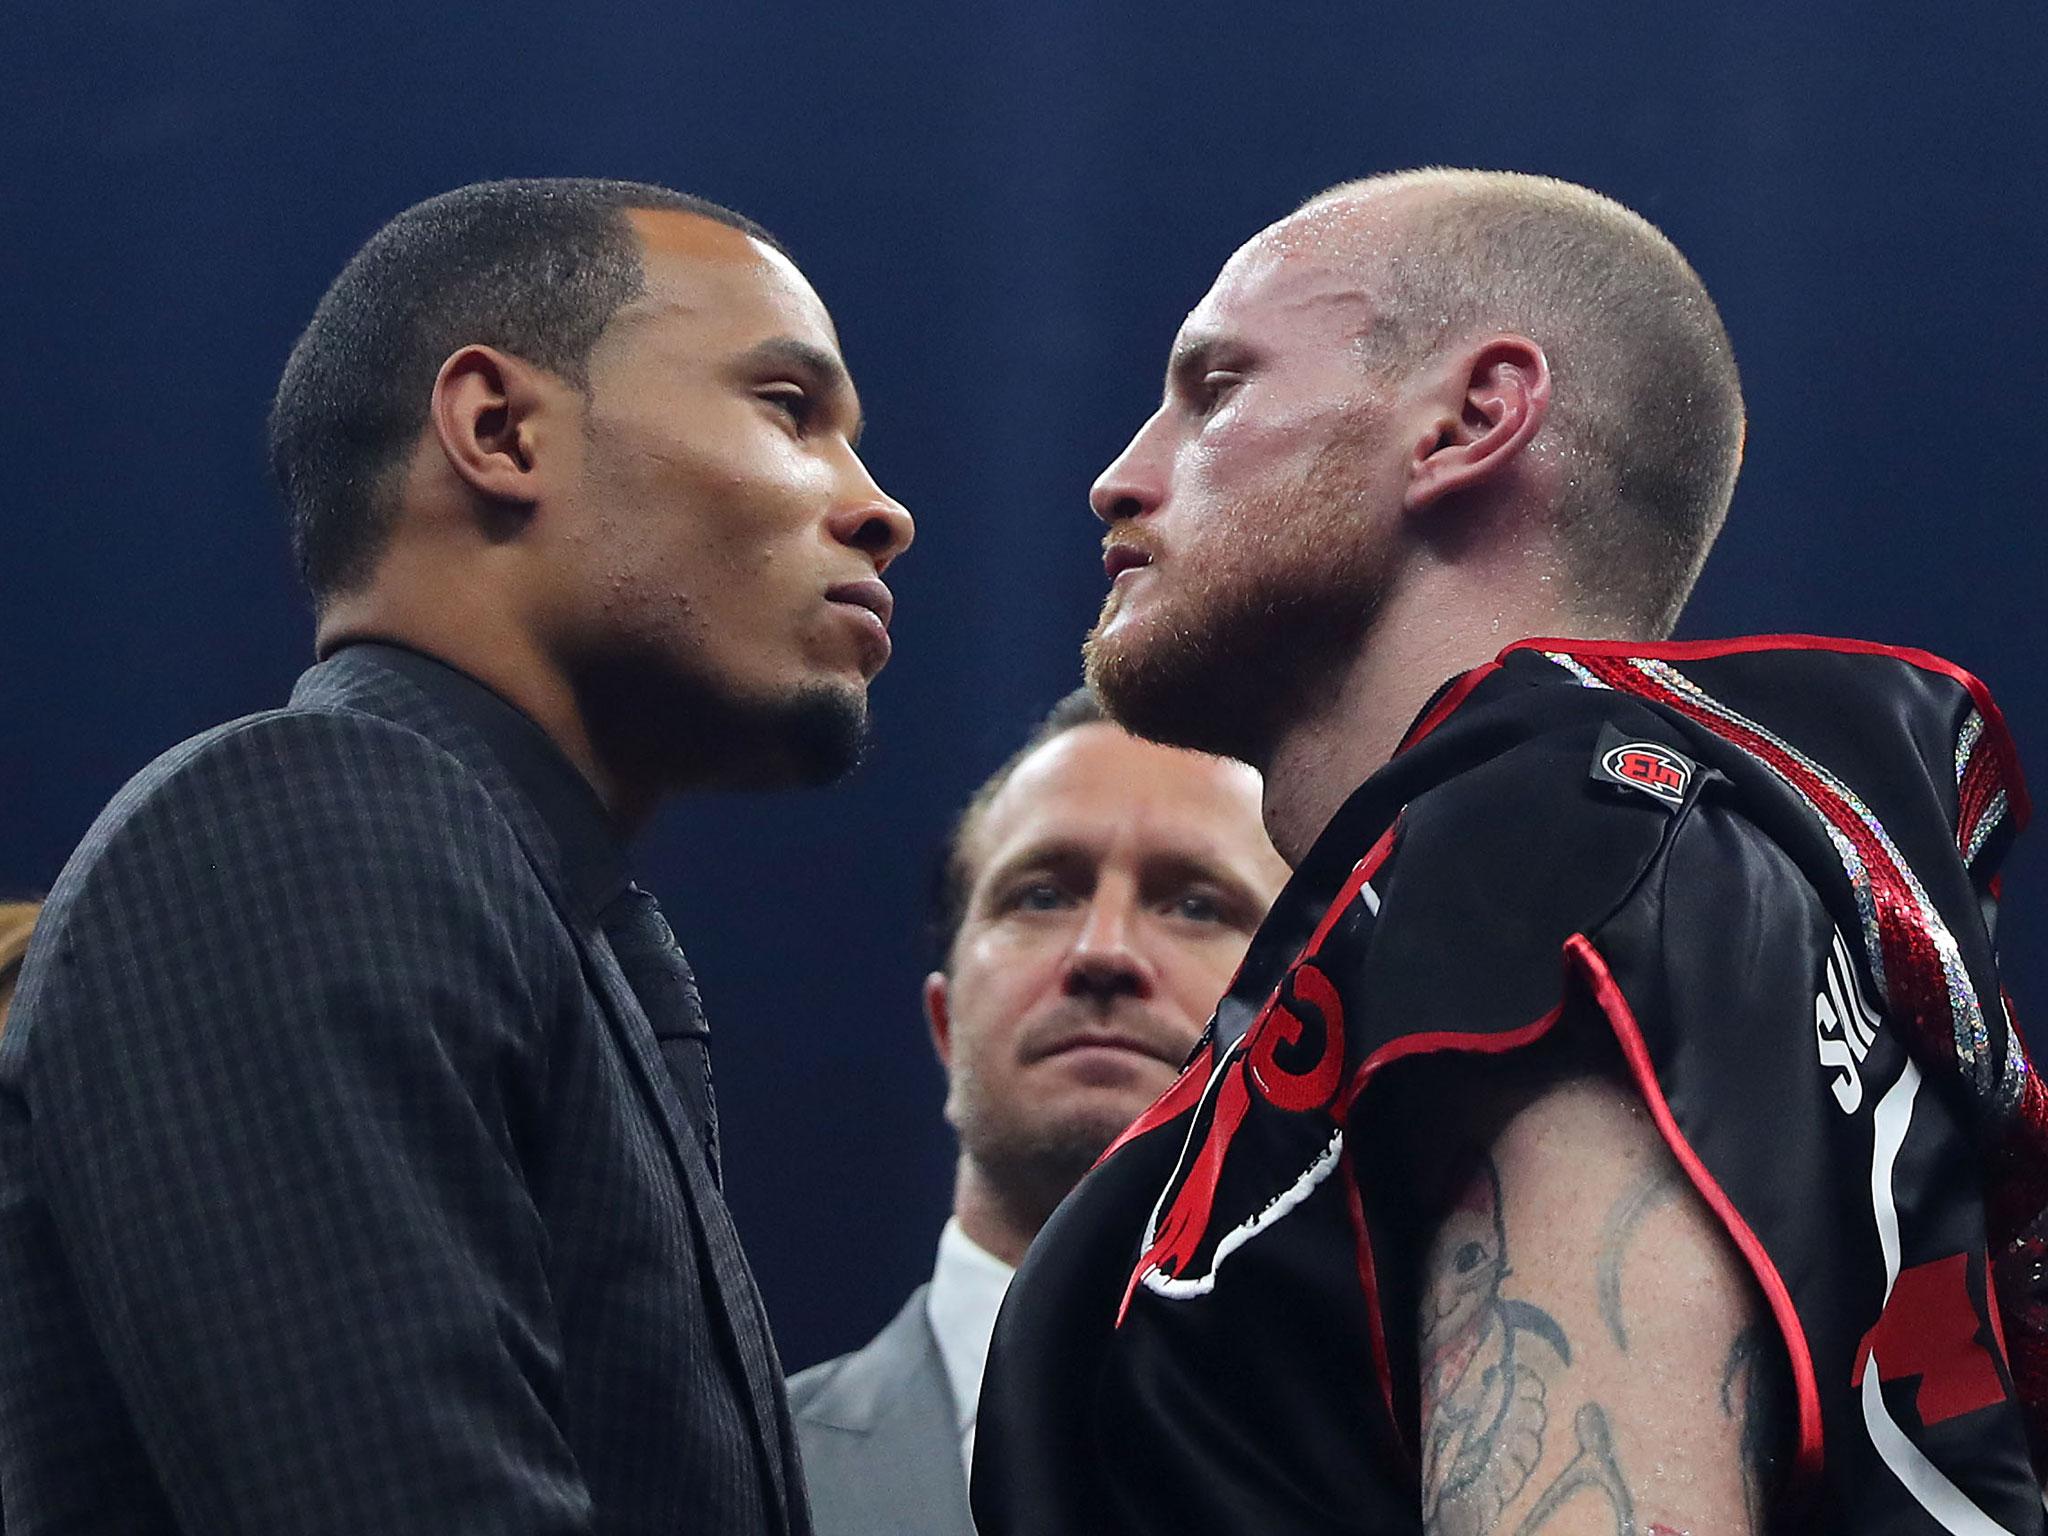 Chris Eubank Jr and George Groves will meet in 2018